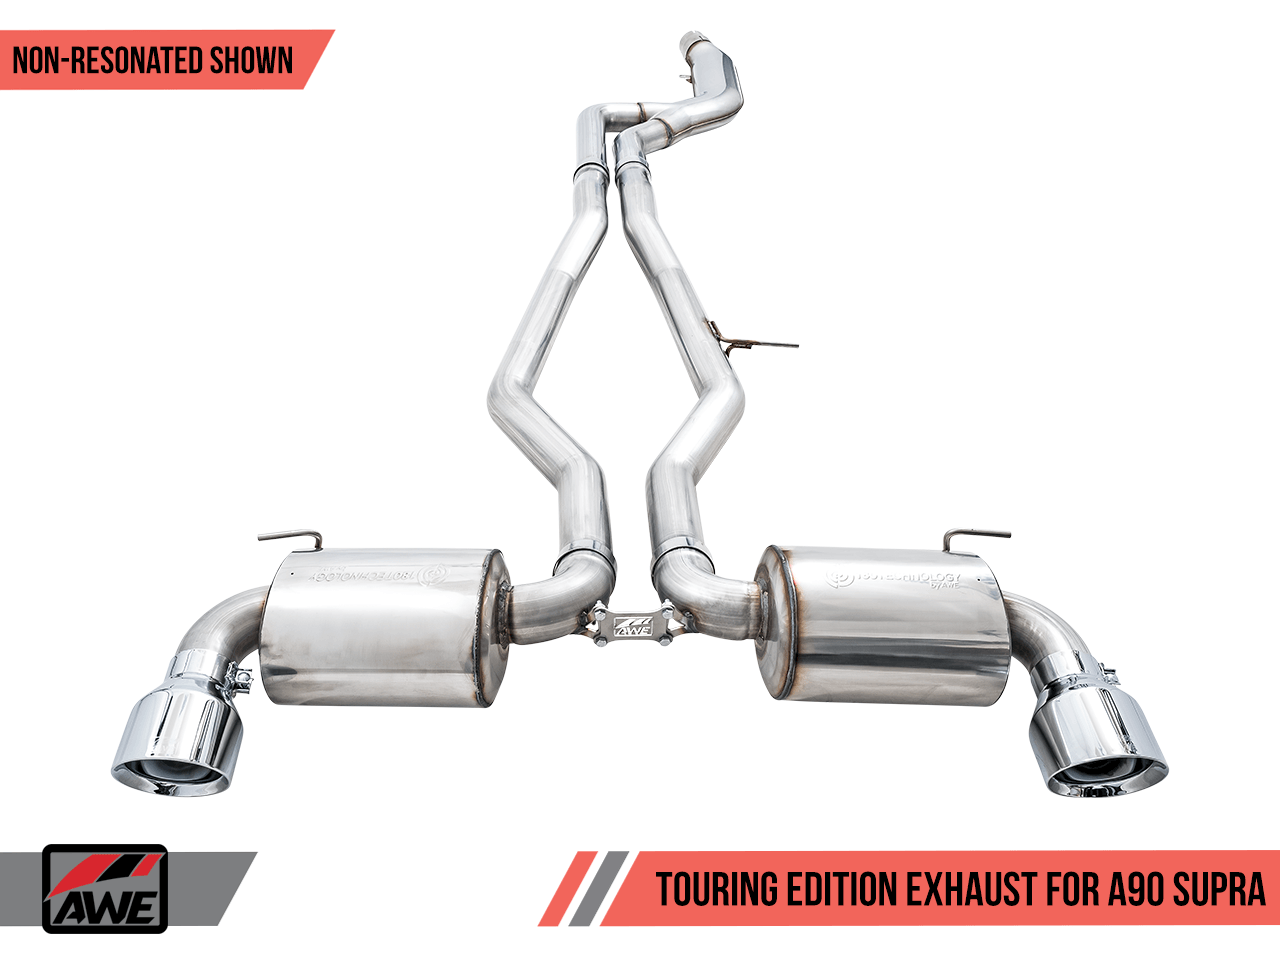 AWE Non-Resonated Touring Exhaust (Chrome Tips) For Toyota Supra A90 - 3020-32058